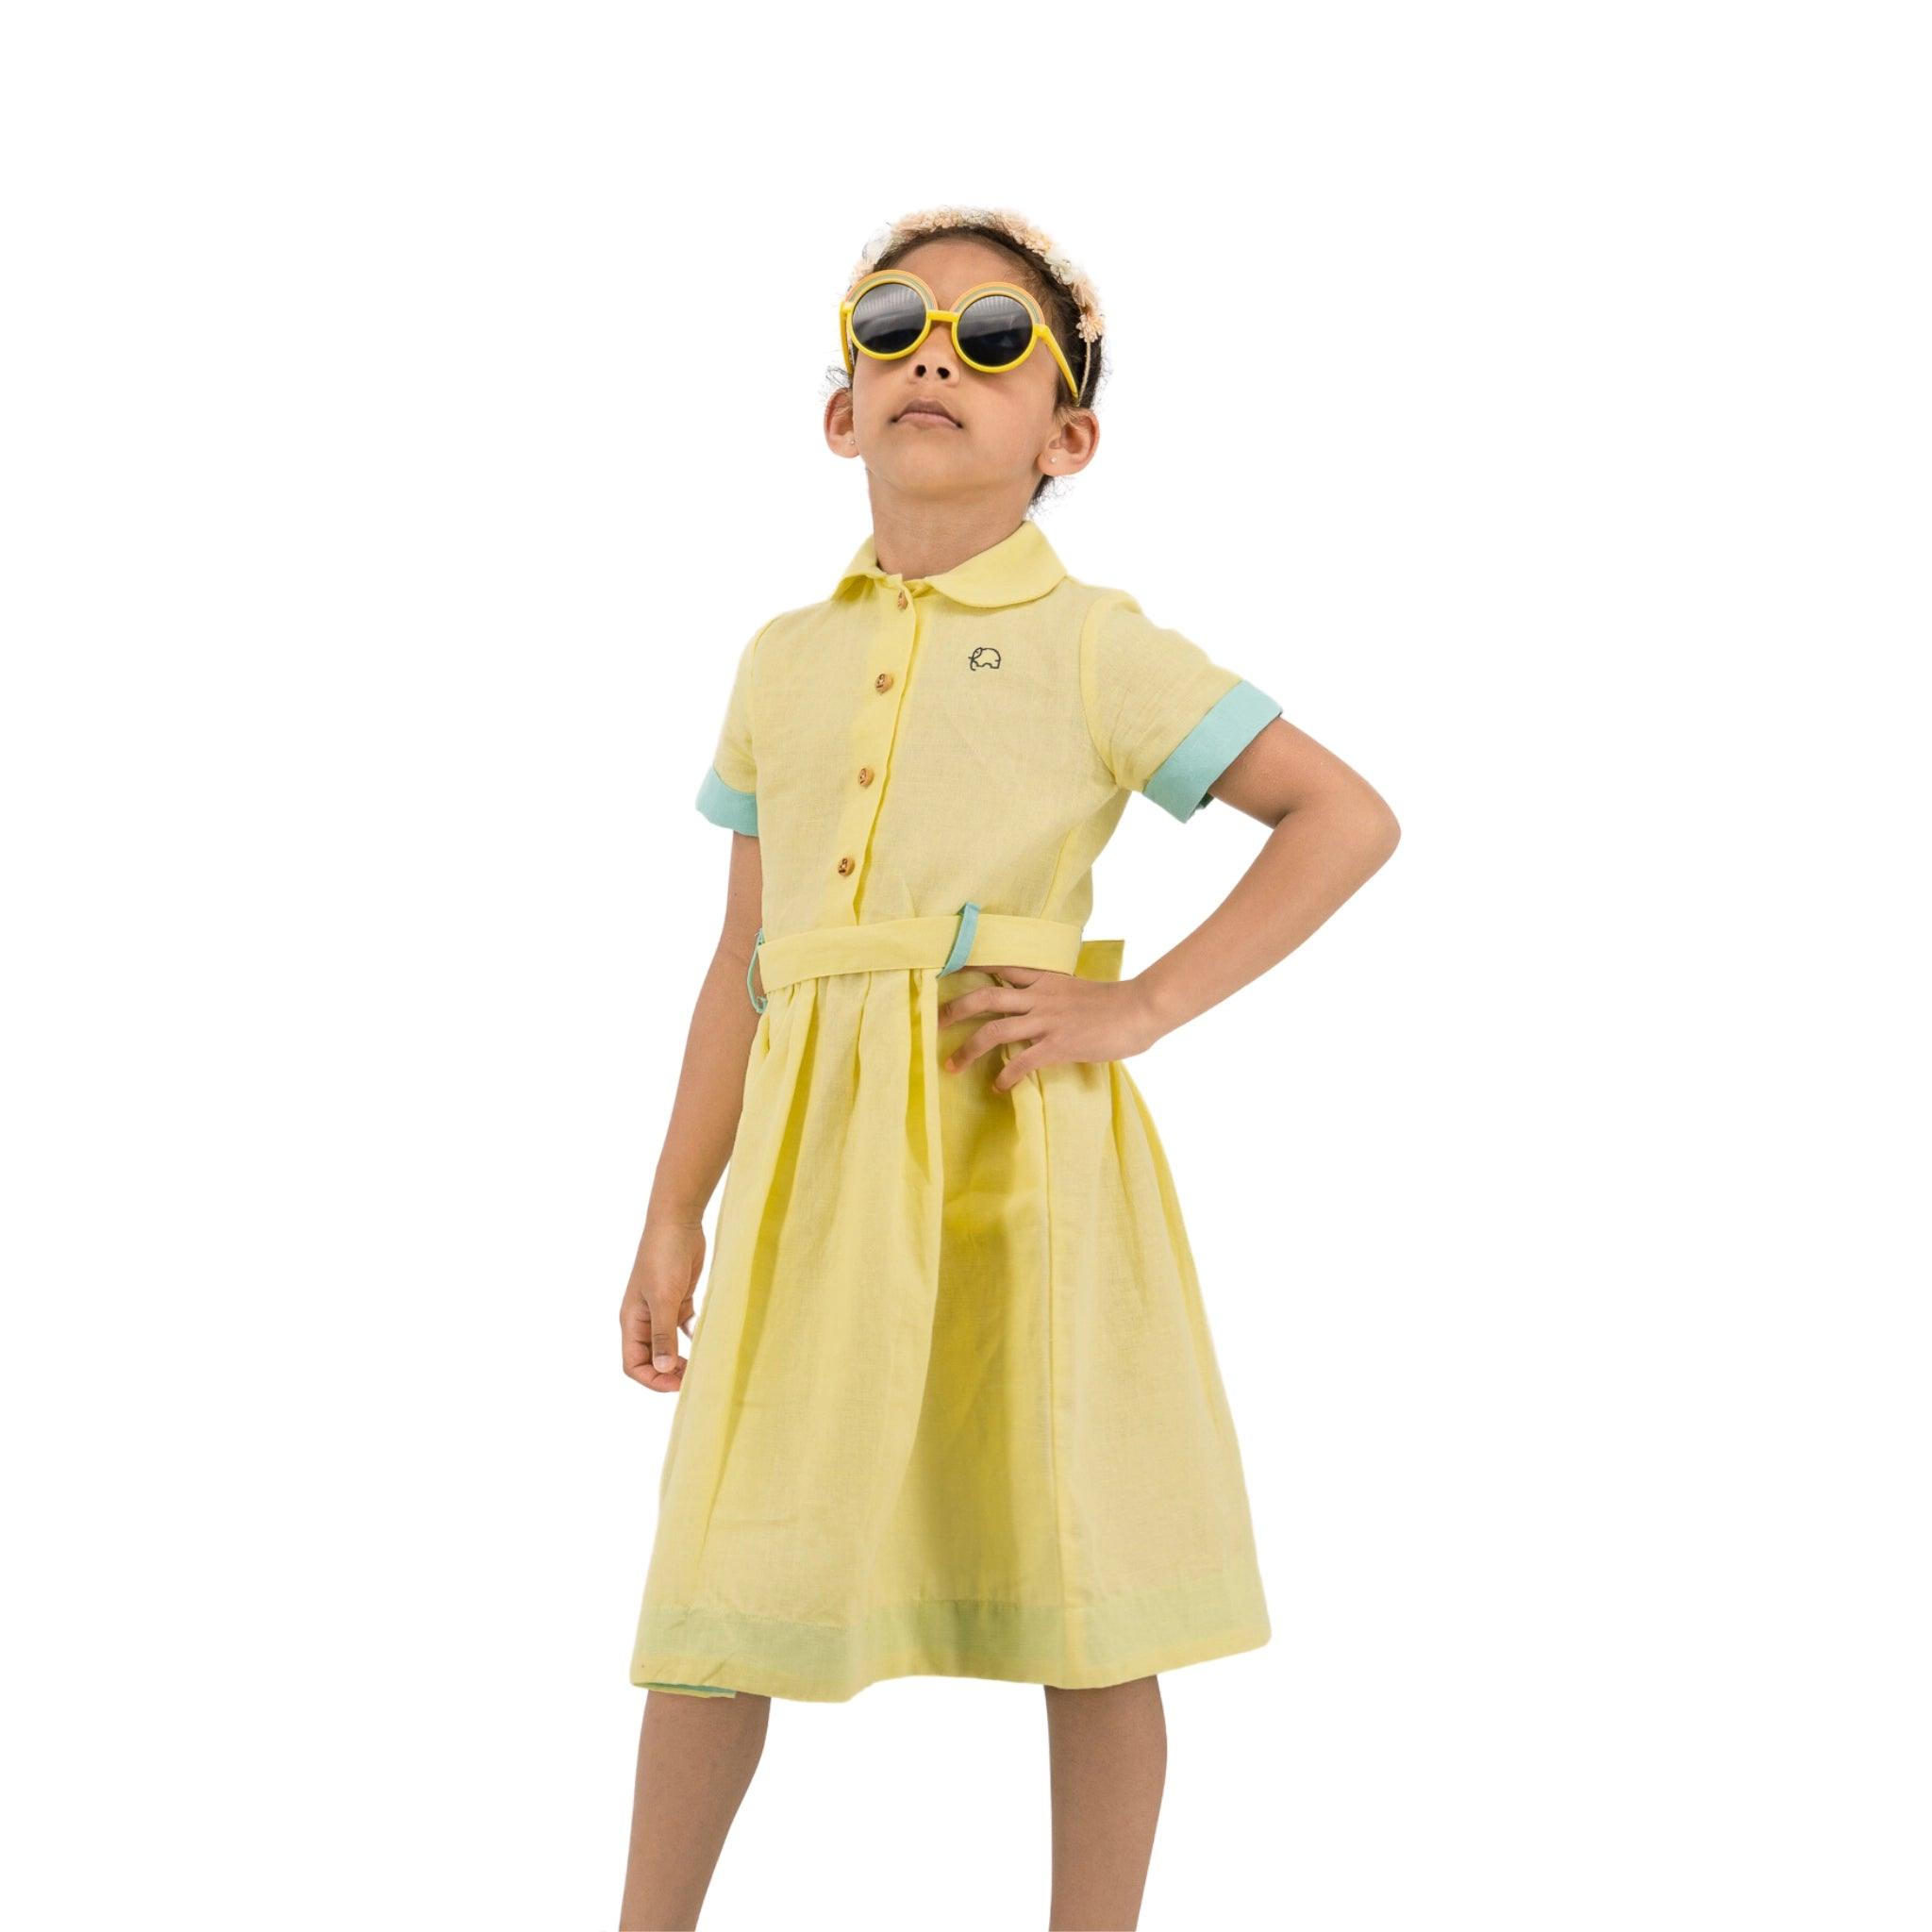 Young girl wearing a Karee elfin yellow linen below knee length dress and large sunglasses, hands on hips, posing confidently against a white background.